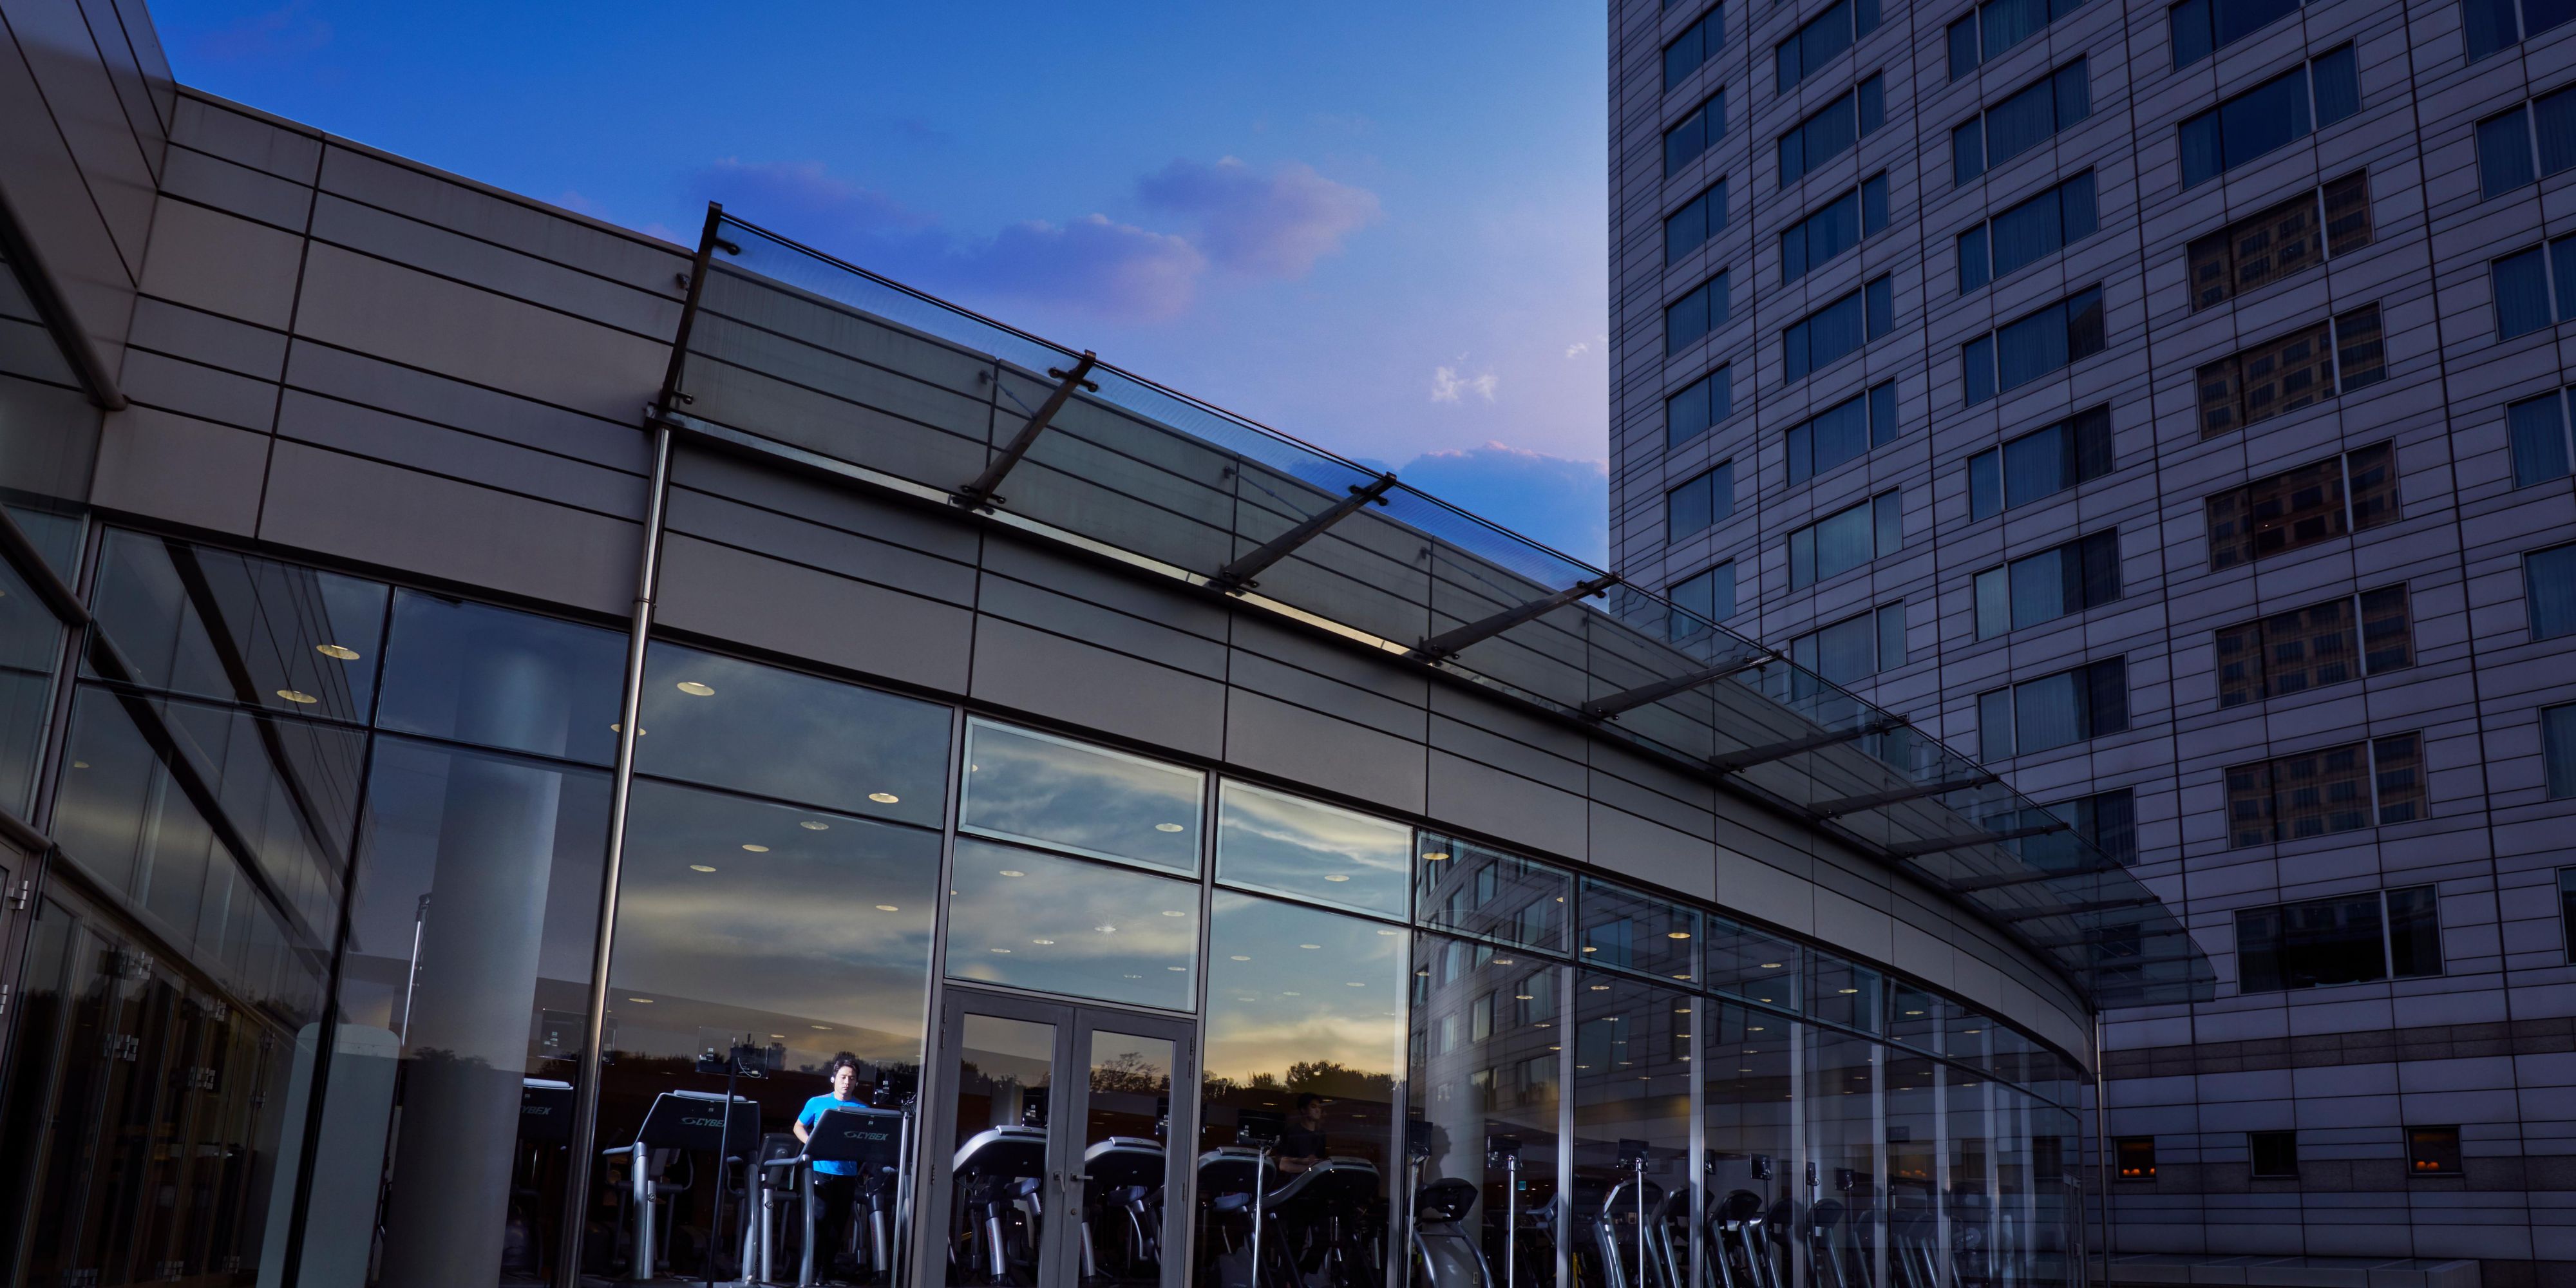 Enjoy an invigorating workout at the Cosmopolitan Fitness Club, bathed in natural daylight from the floor-to-ceiling glass windows and fitted with modern fitness equipment. Don't miss the 25-metre indoor swimming pool and the aerobics studio, set against the backdrop of breathtaking views of Bongeunsa Temple.